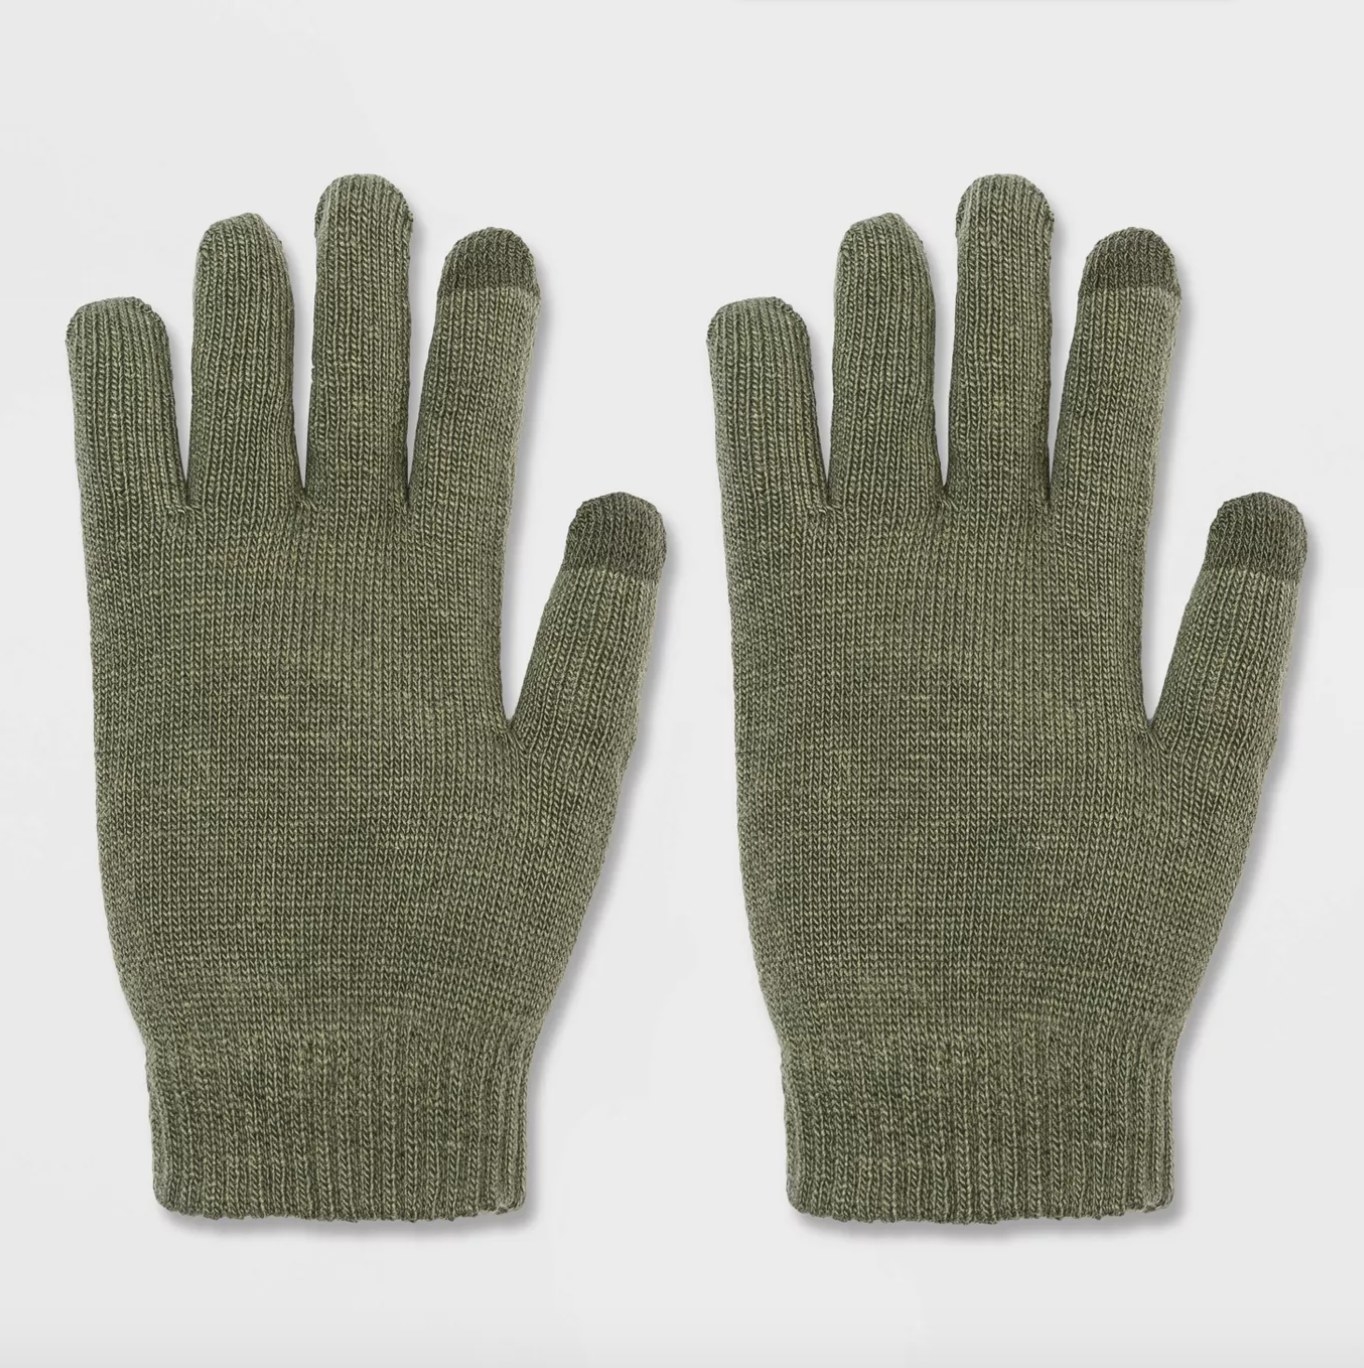 There are two olive gloves with touch-screen compatible fingers on the the thumb and pointer